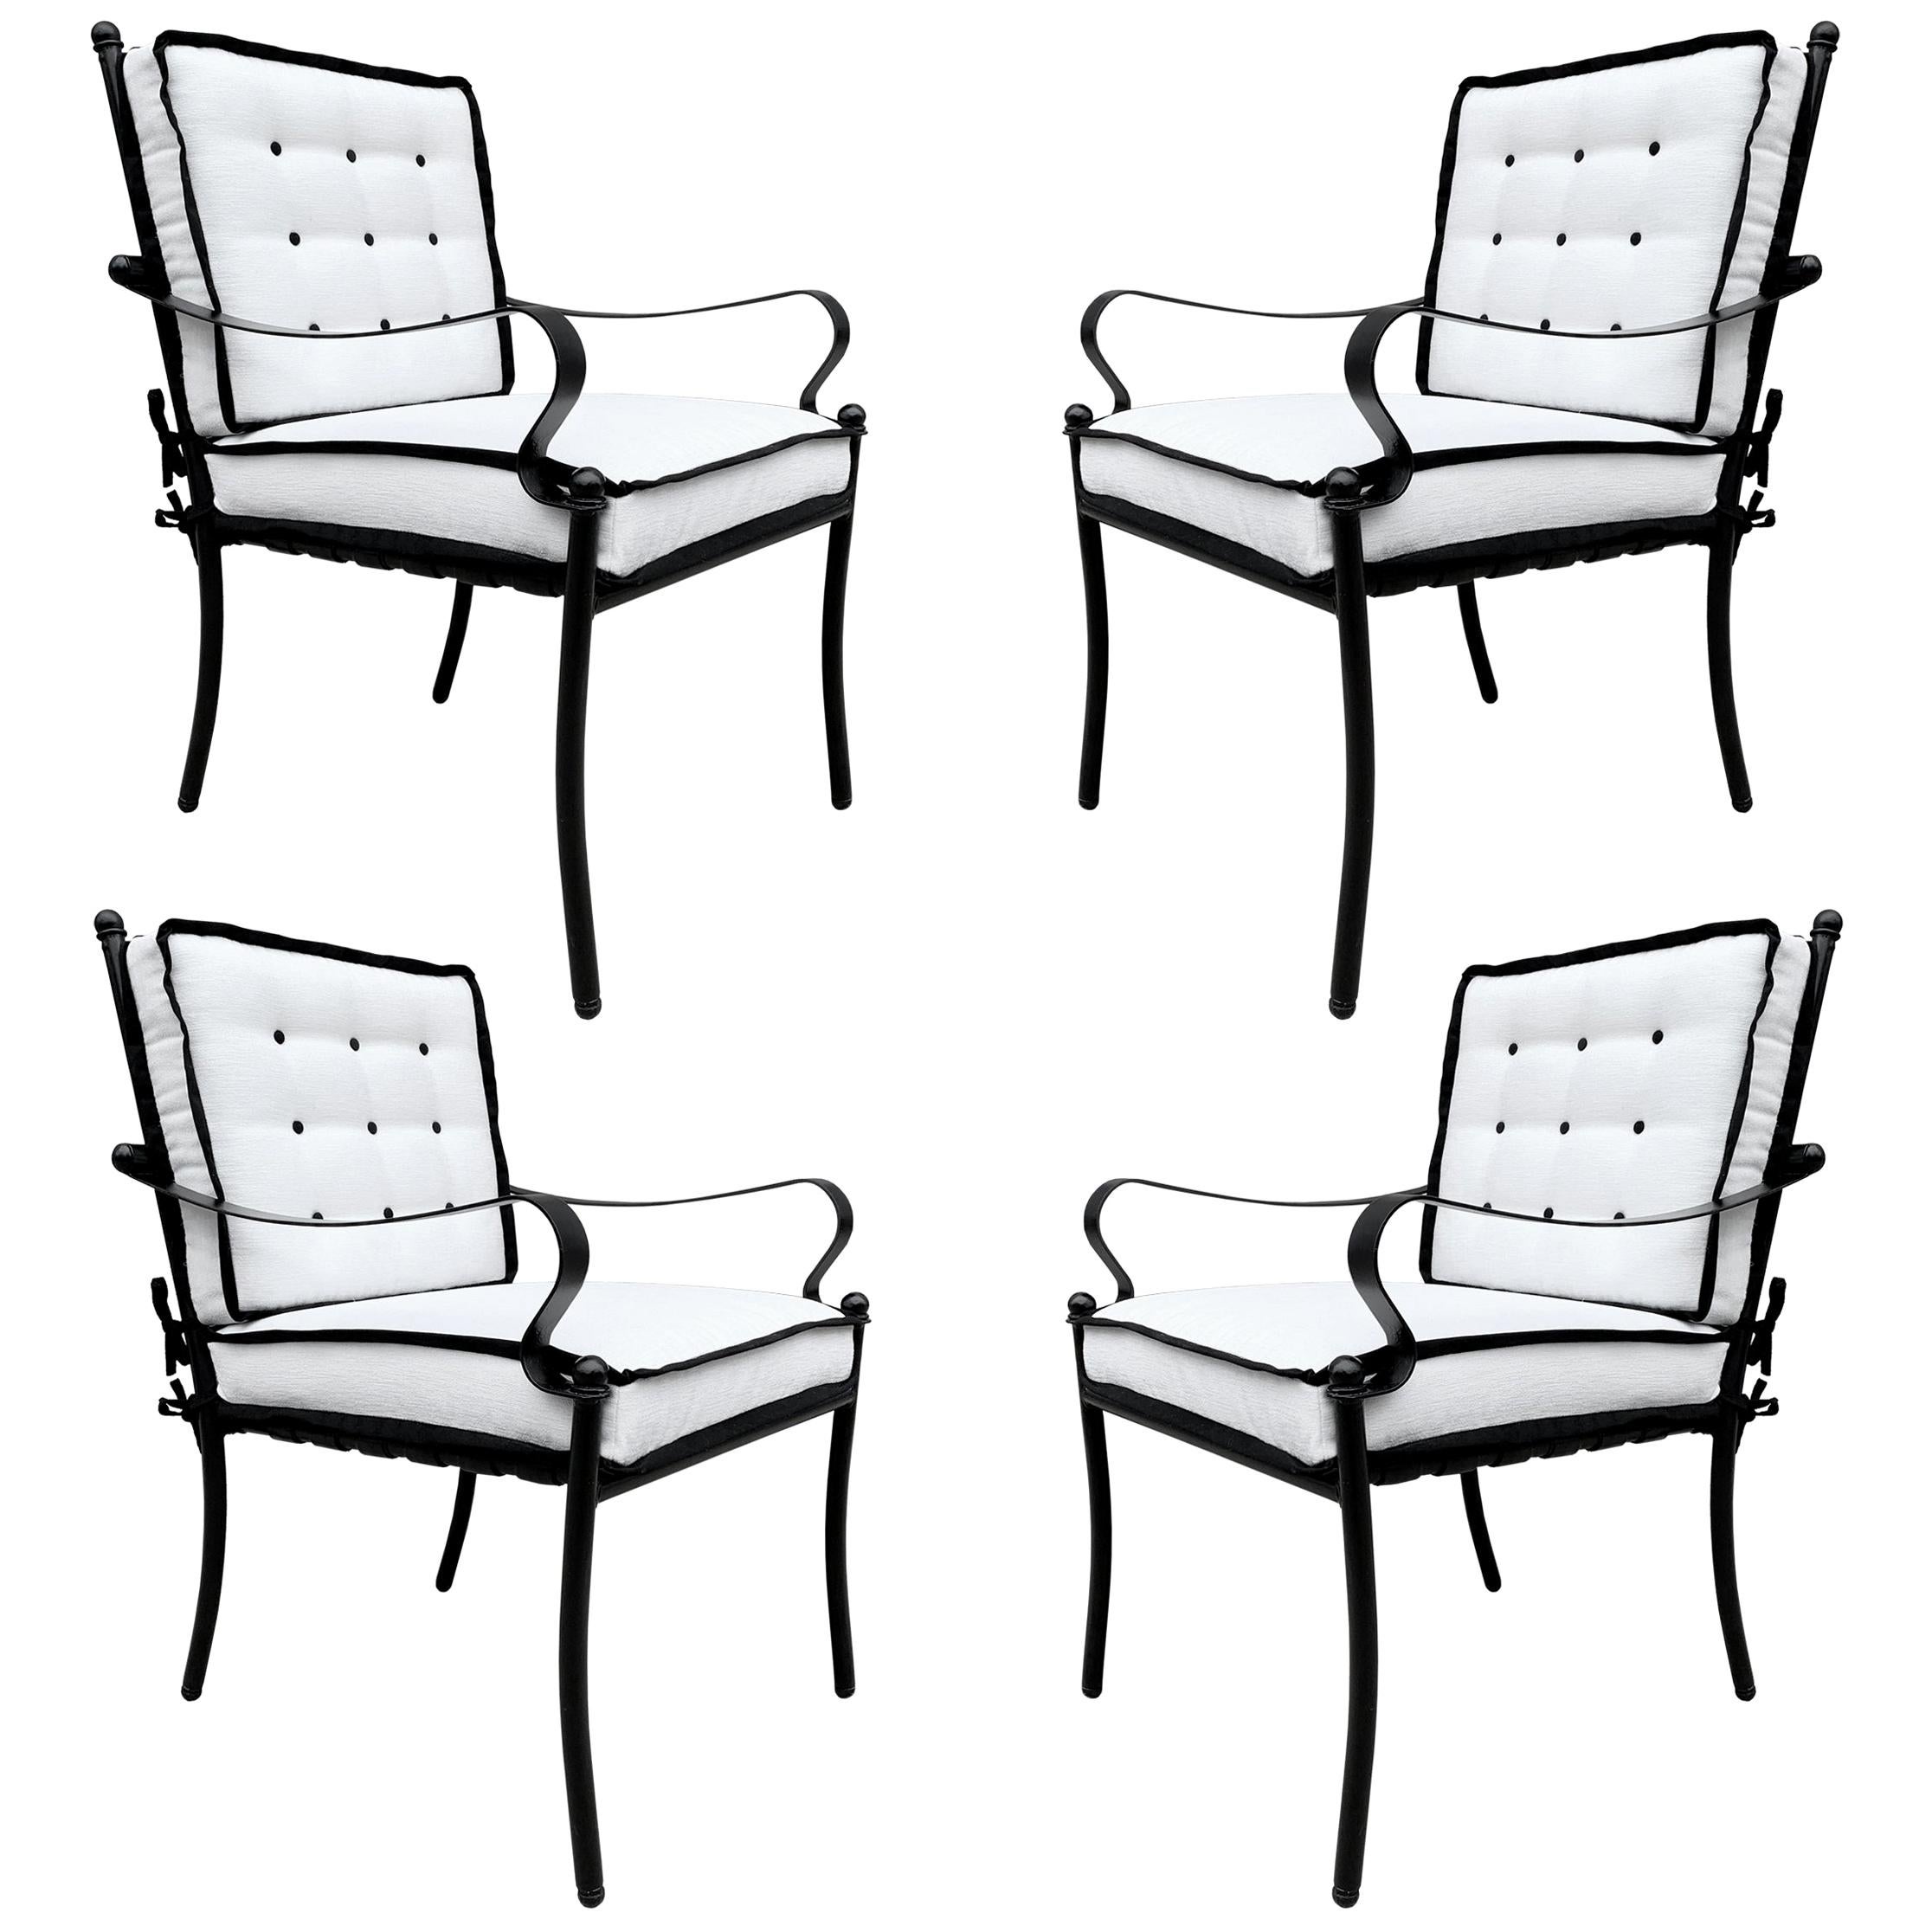 Set of Four Mid-20th Century American Iron Patio Chairs